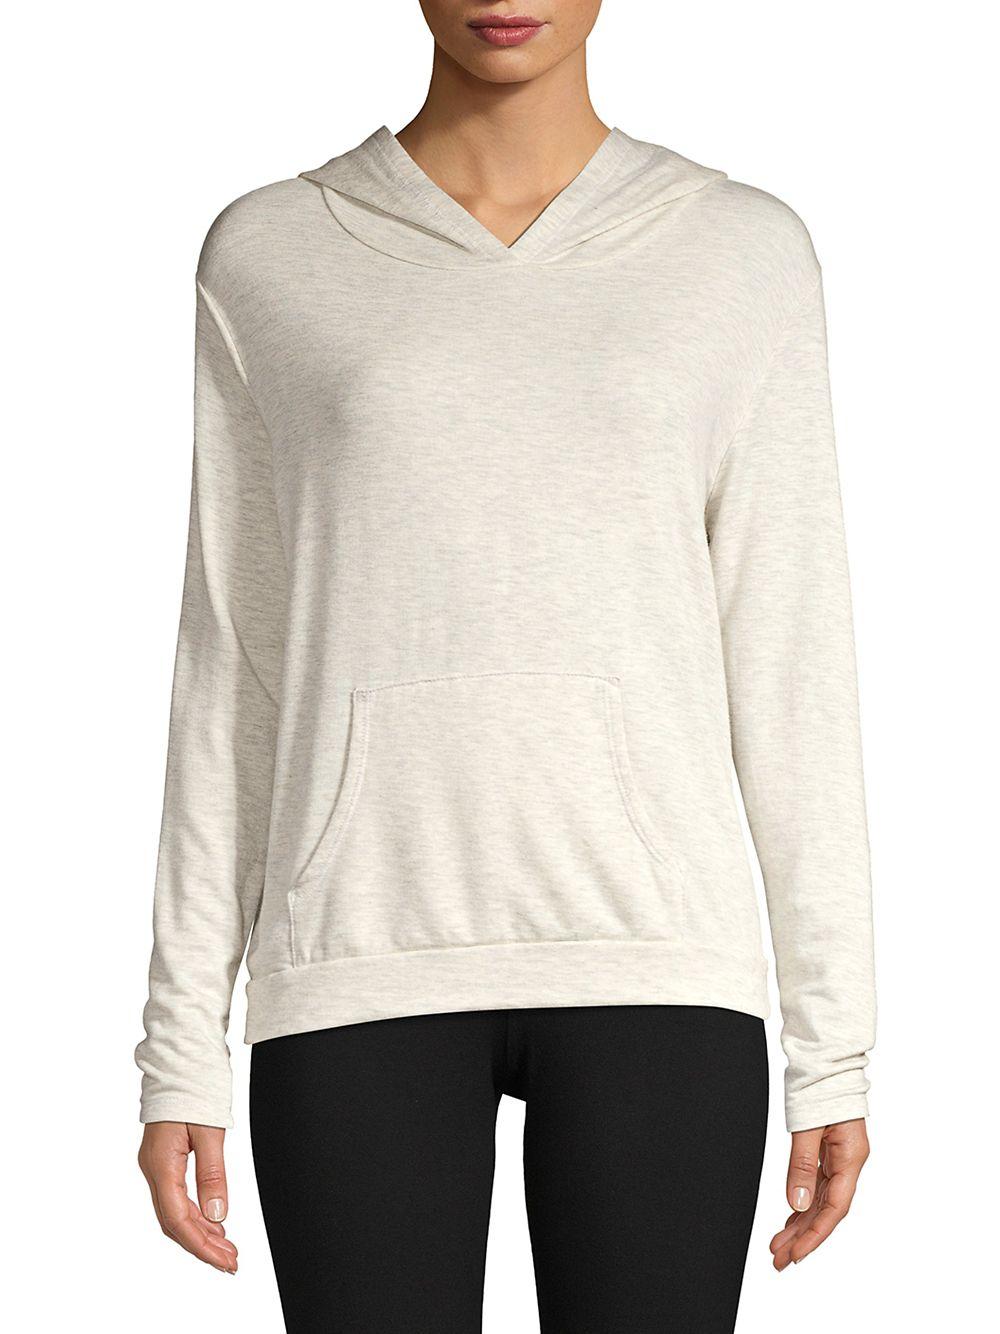 Good Hyouman Love Yourself Hoodie in Natural - Lyst